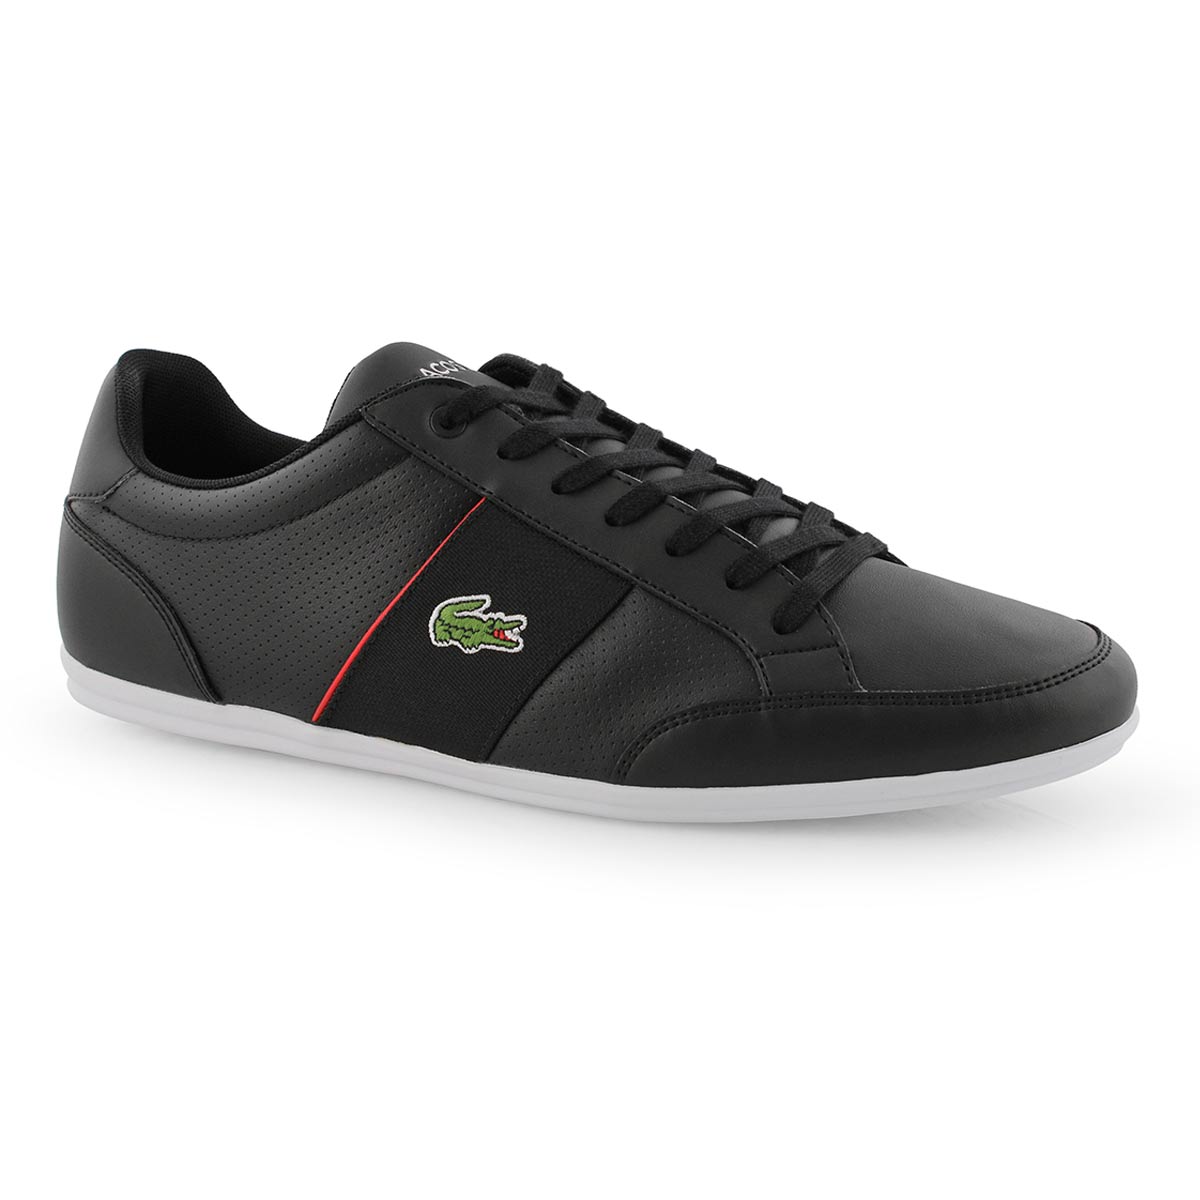 lacoste black and red shoes - 59% OFF 